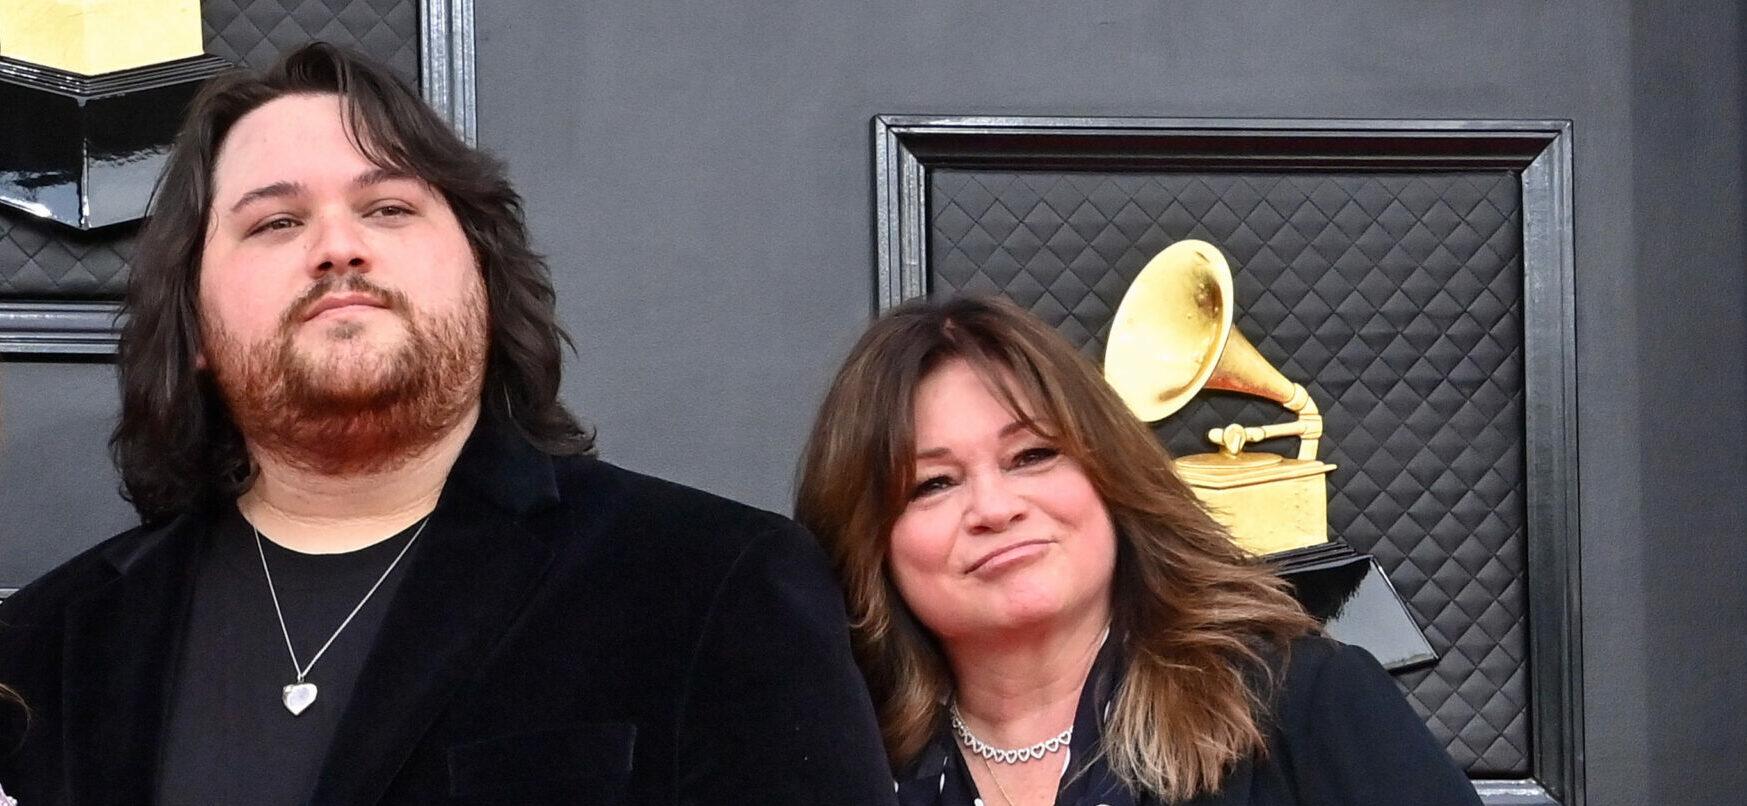 Valerie Bertinelli Gushes About How Yellow Reminds Her Of Son Wolfgang Van Halen